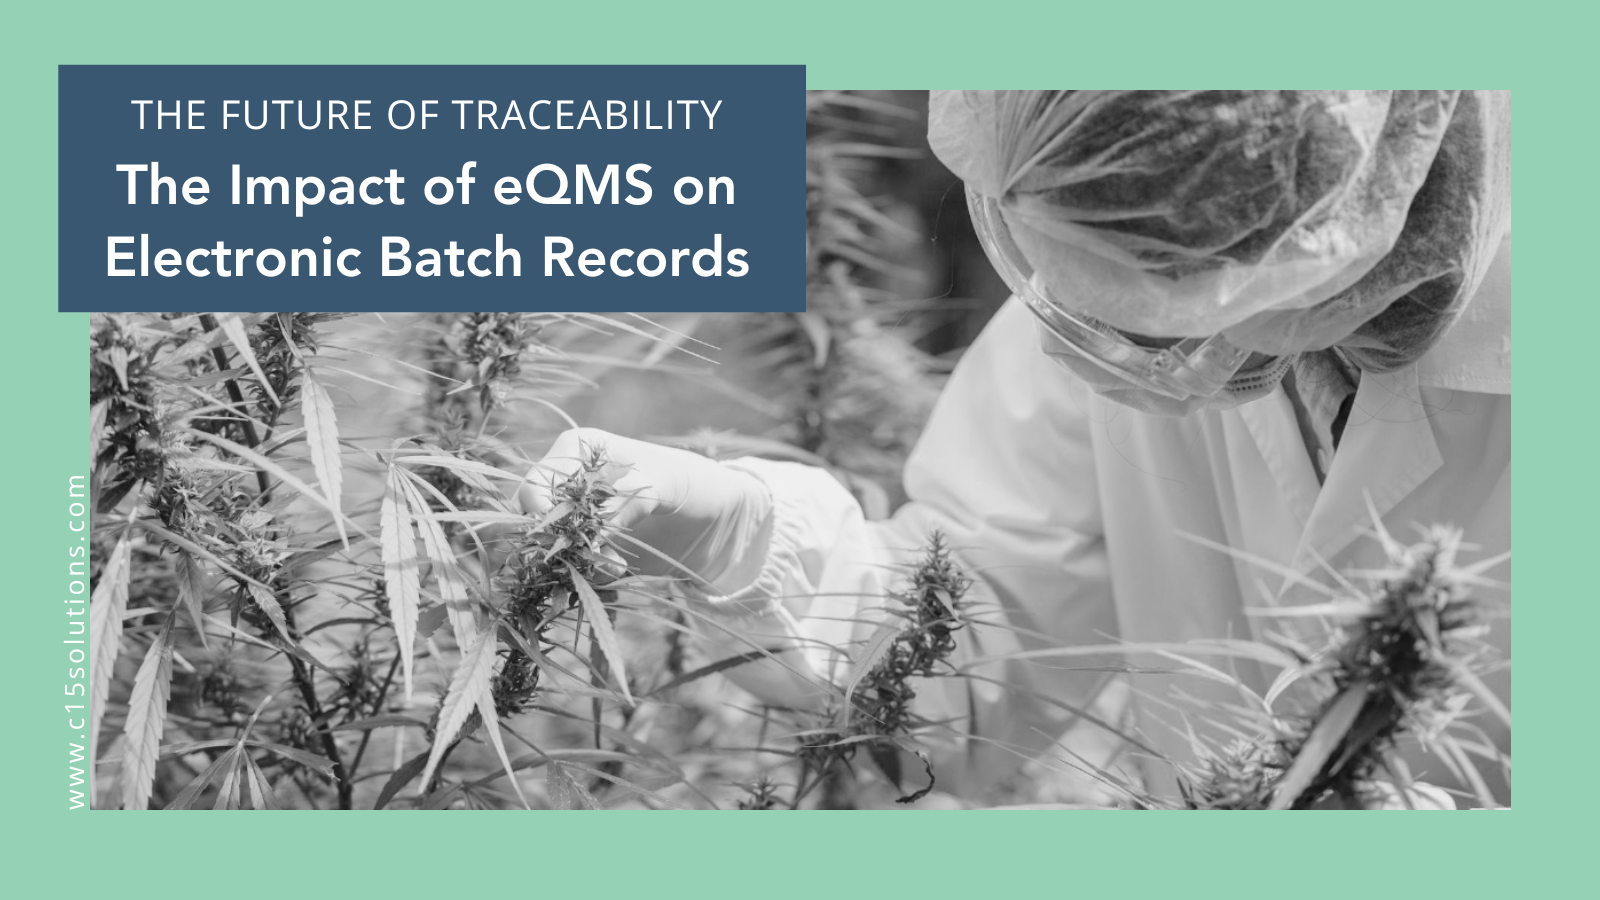 The Future of Traceability: The Impact of eQMS on Electronic Batch Records